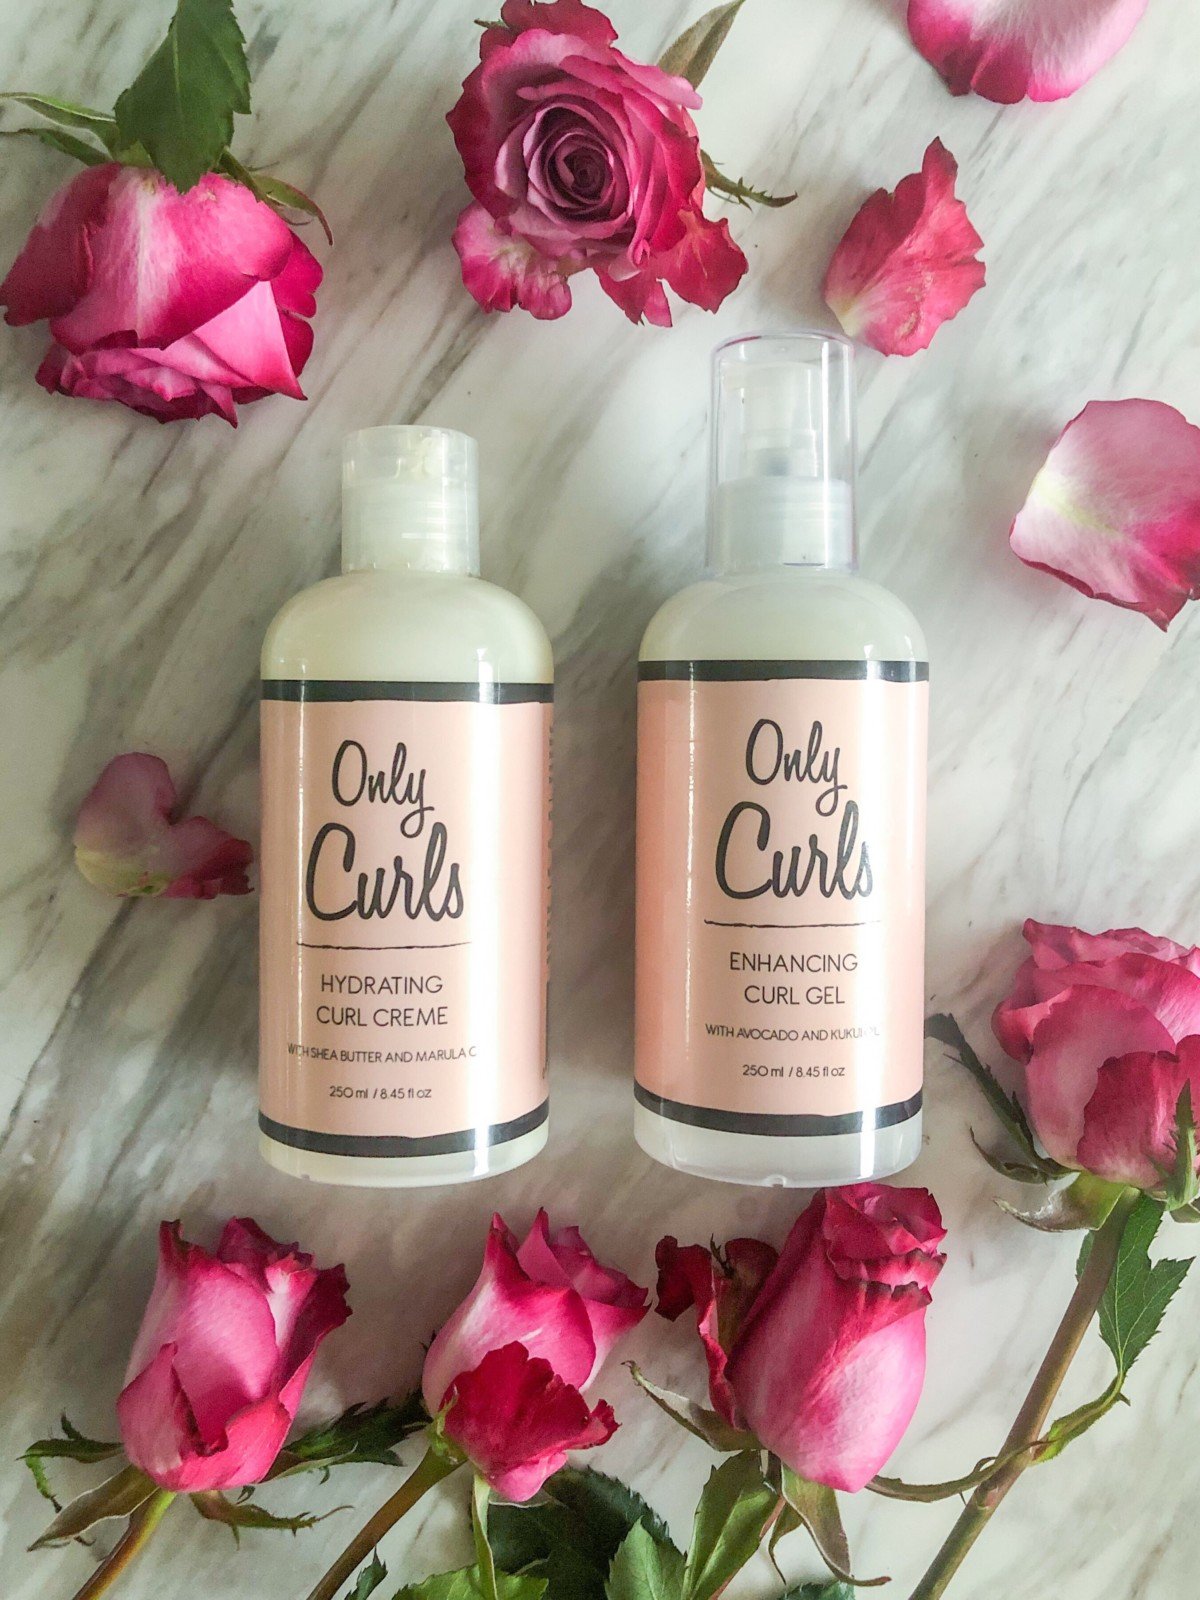  Specifically for girls with curls and perfect for the curly girl method Only Curls are a vegan natural brand. Only Curls Hydrating curl creme and Curly girl UK approved Enhancing Curl gel.